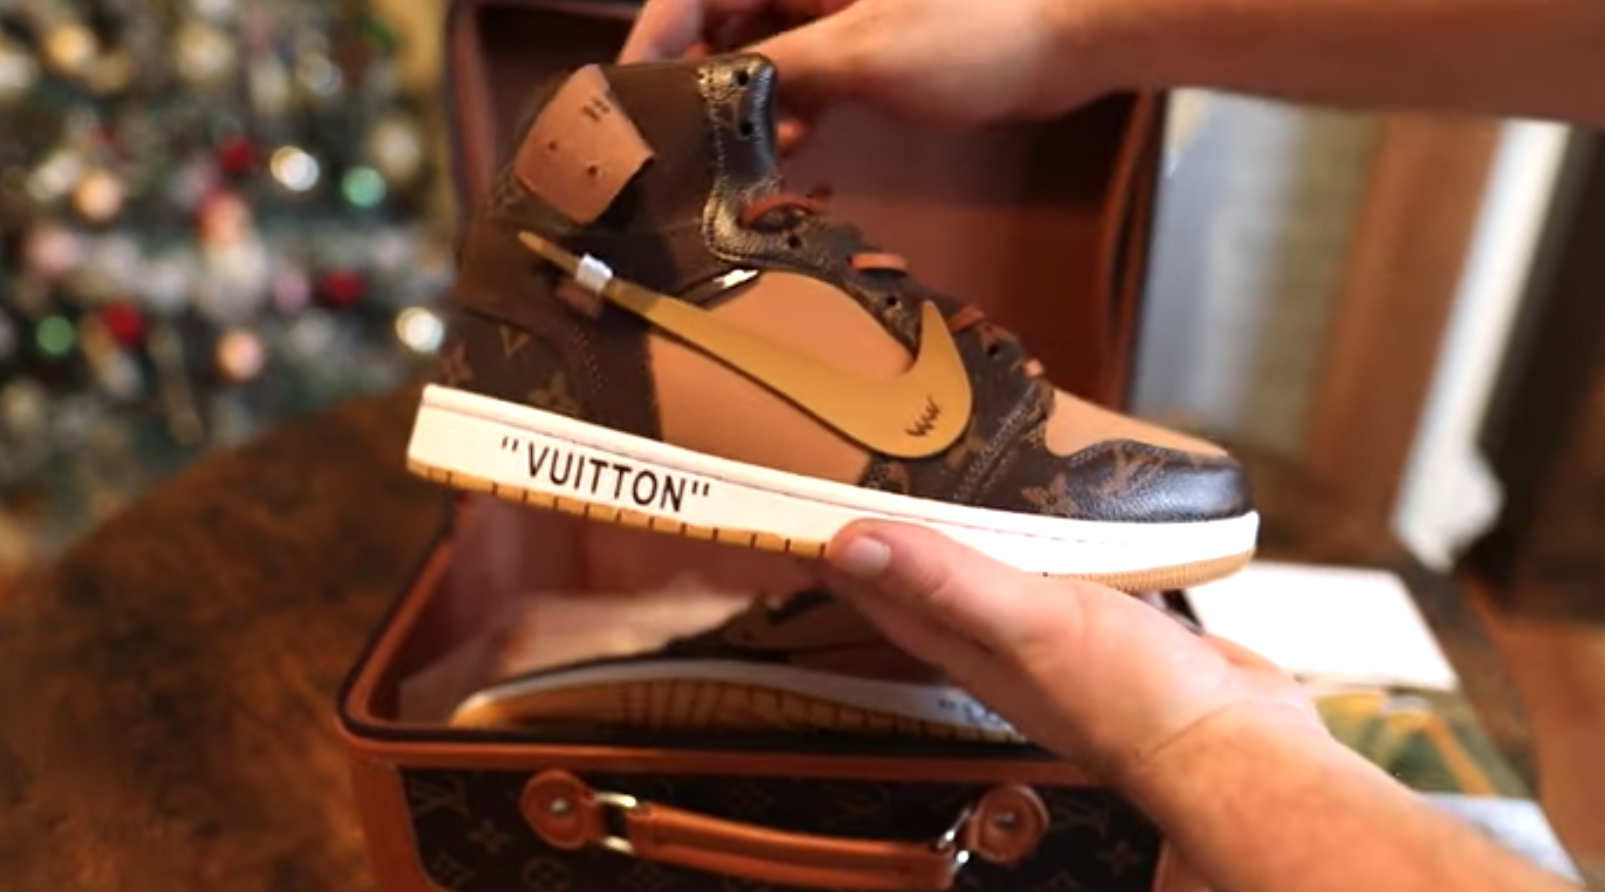 Possibly Nike x Louis Vuitton collab 👀 Invitations were sent out today  inviting people to join …